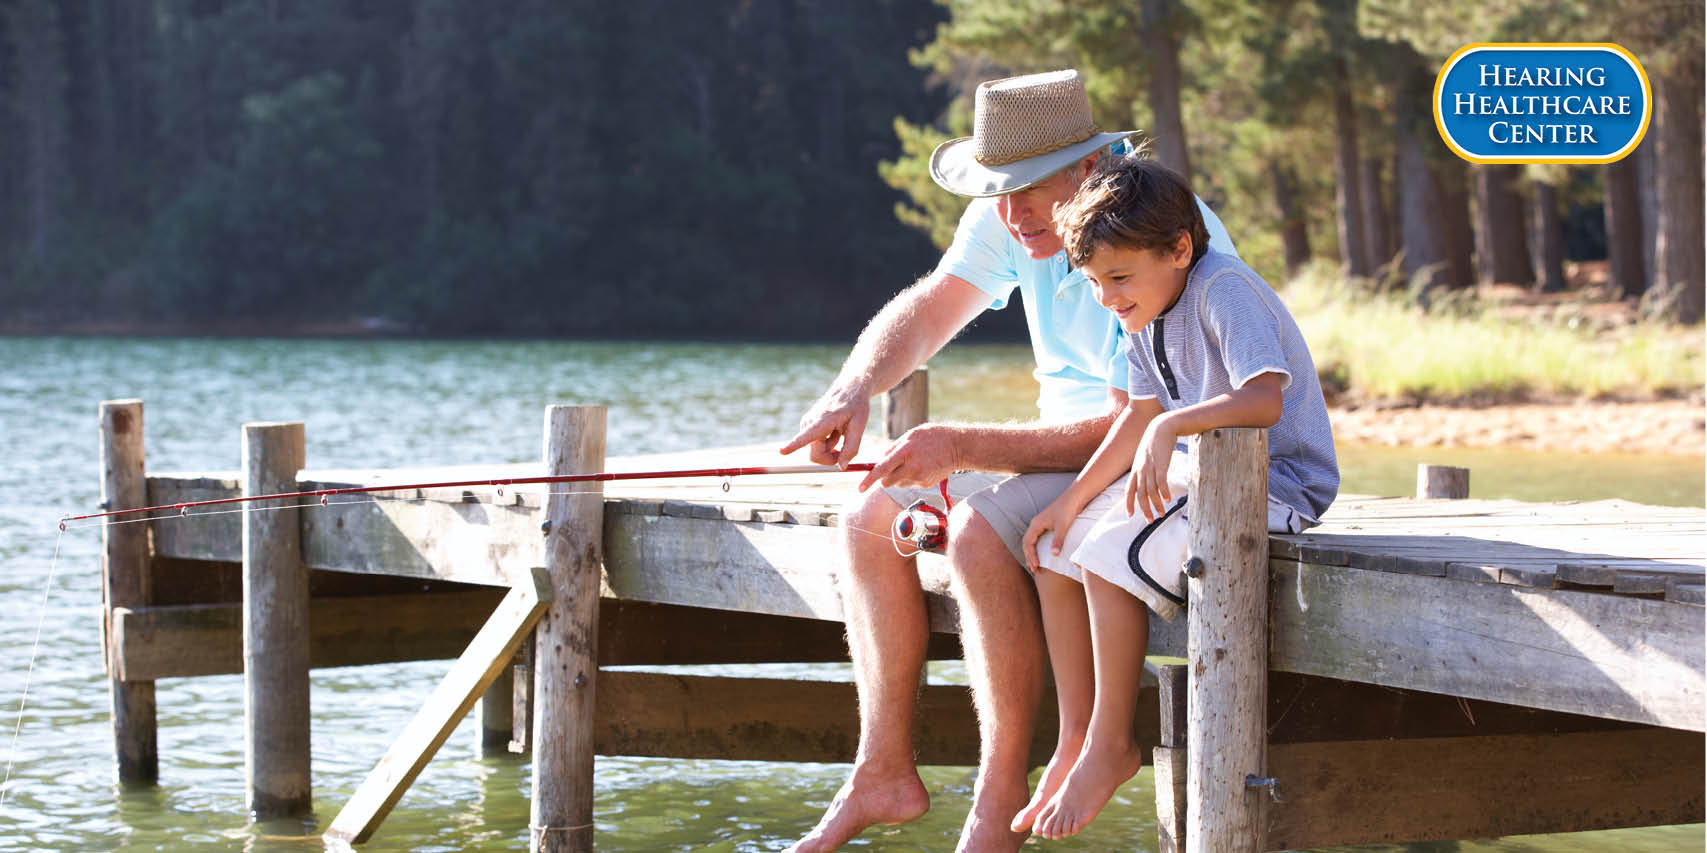 A grand father and boy fishing showing spring is here and its time to get your hearing checked.